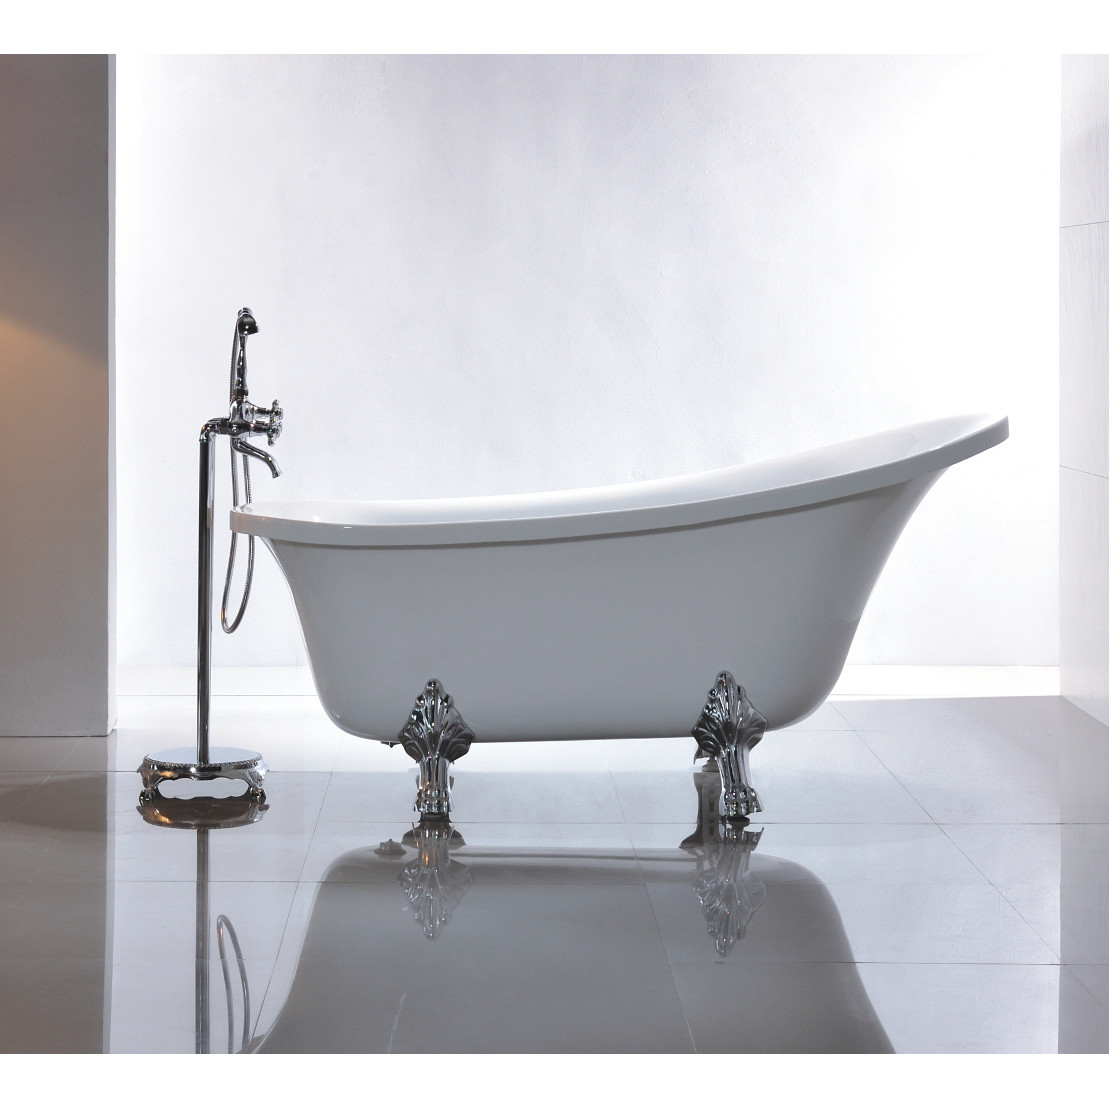 Va6310-l Freestanding Claw Foot White Acrylic Bathtub With Polished Chrome Pop-up Drain - 69 X 30 X 29.5 In.